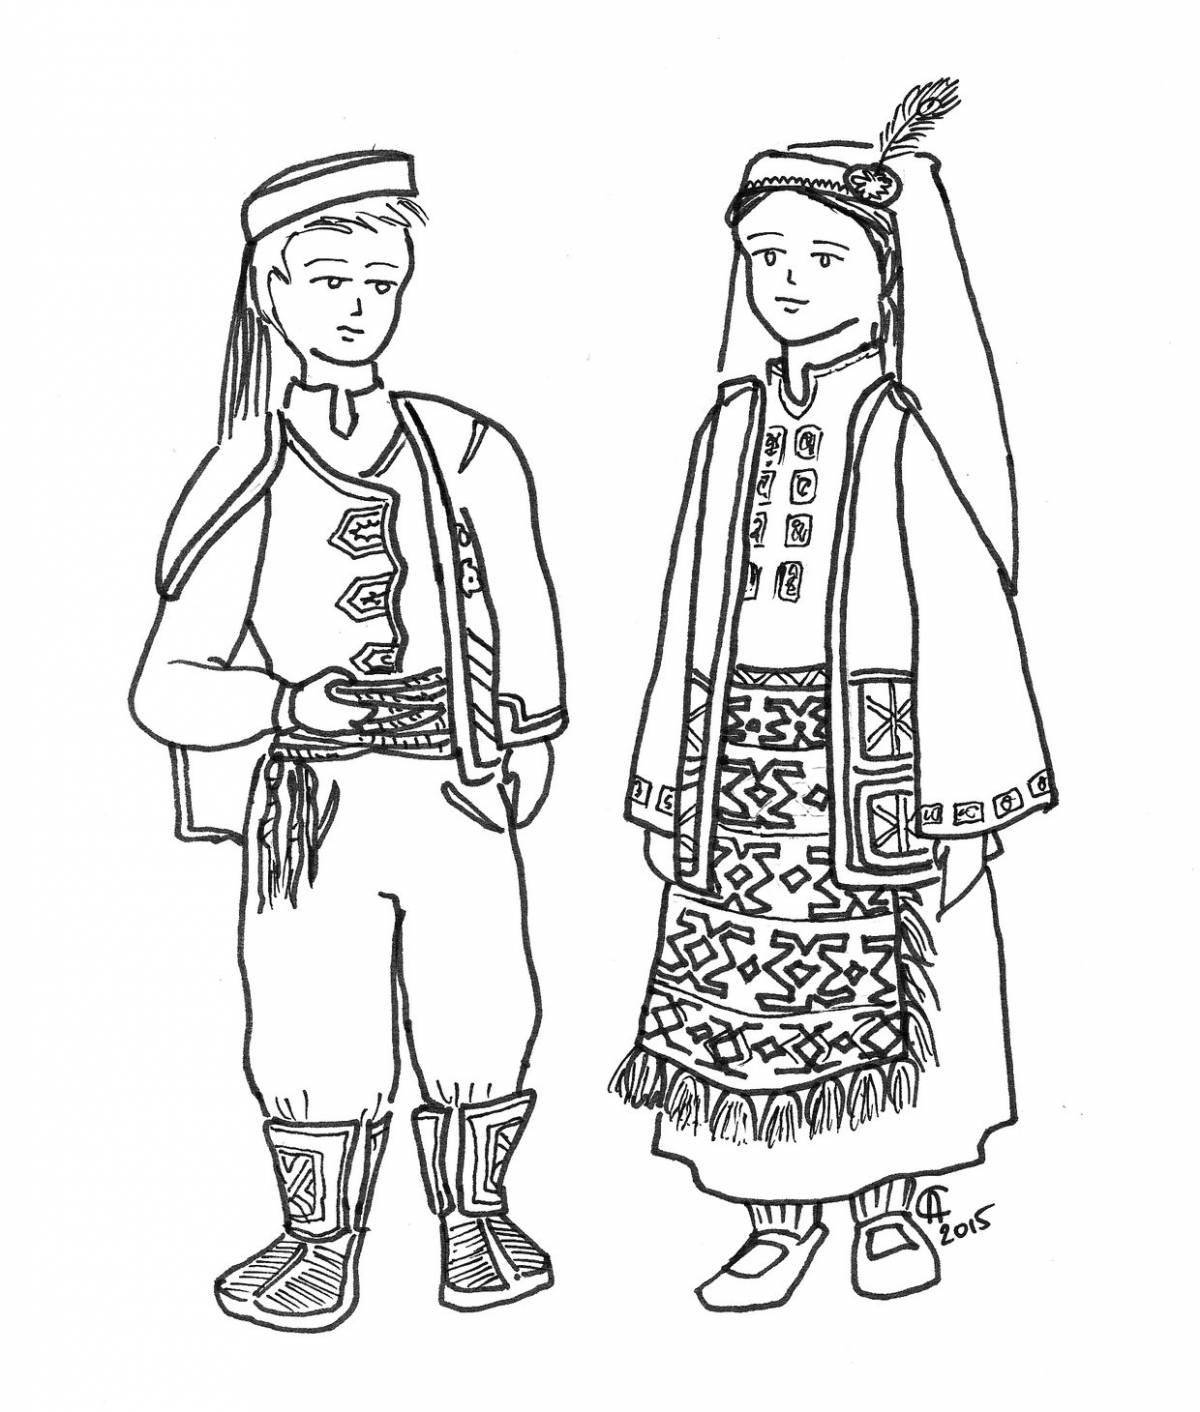 Coloring page cheerful Tula folk costume